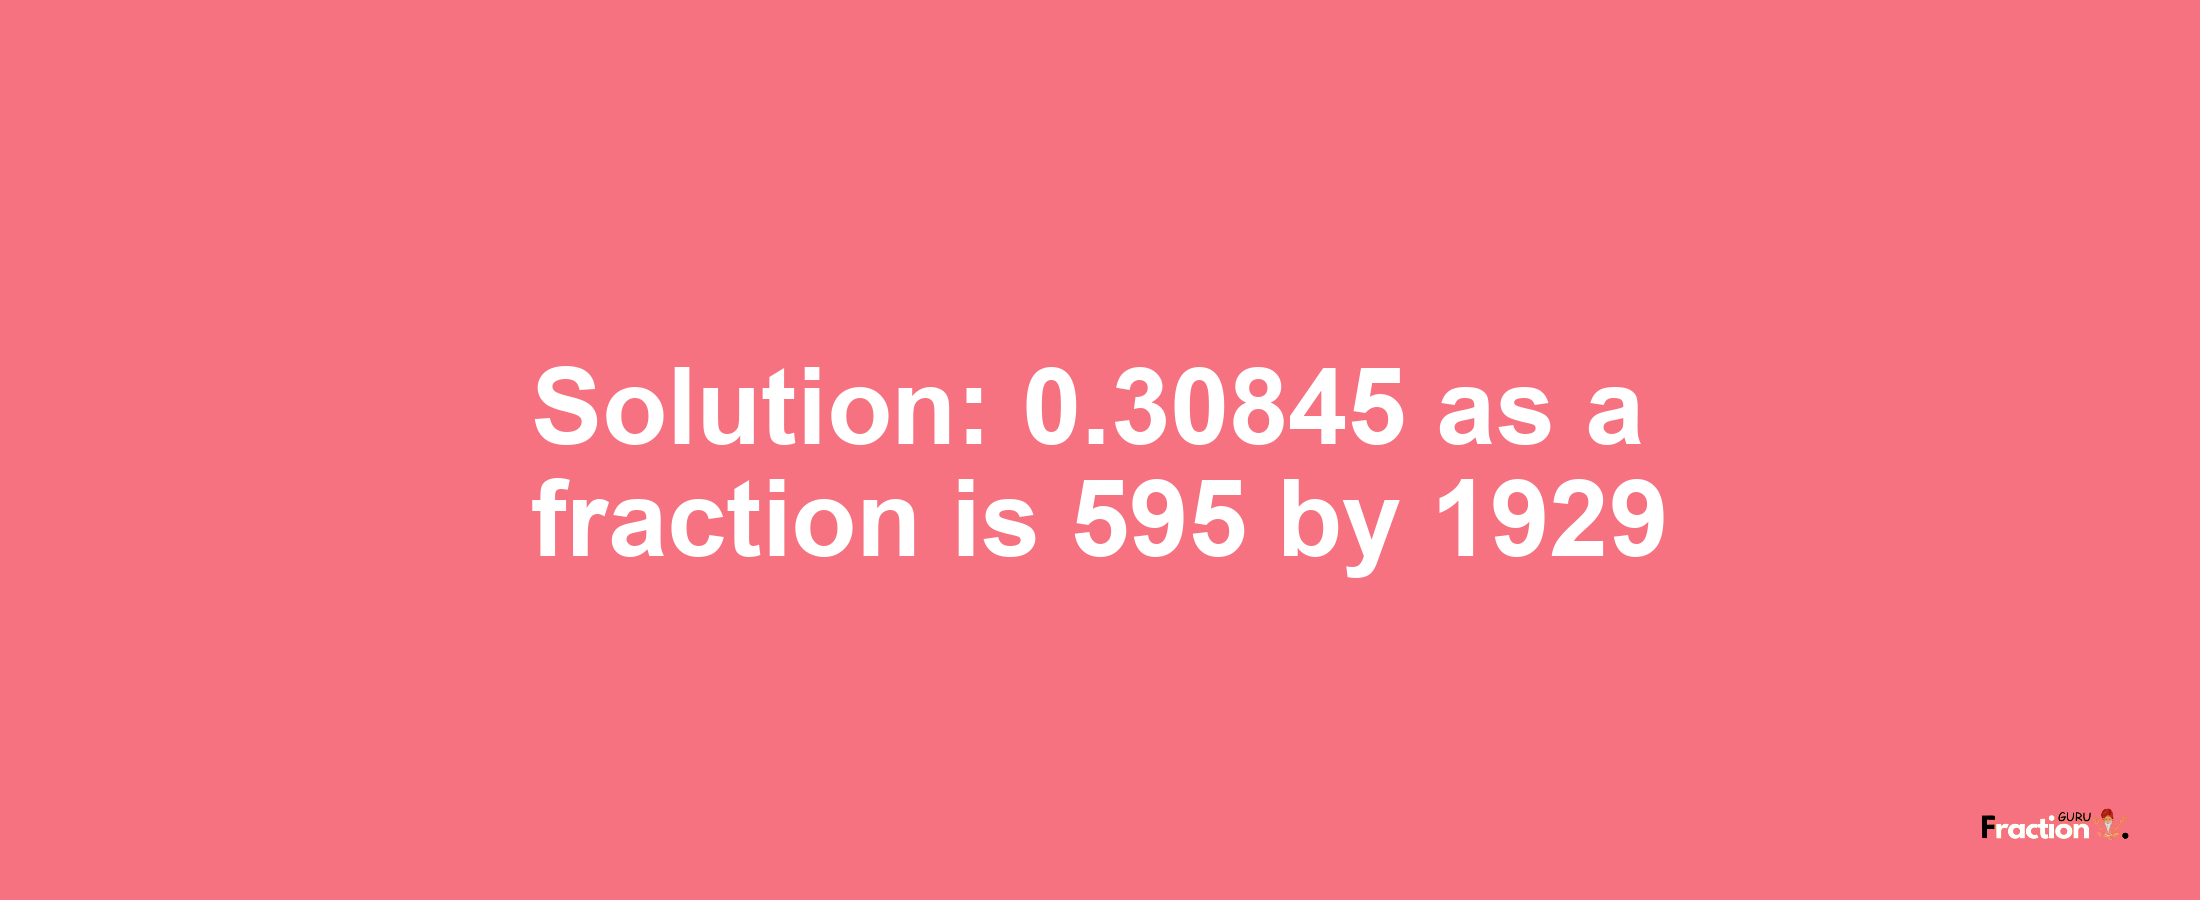 Solution:0.30845 as a fraction is 595/1929